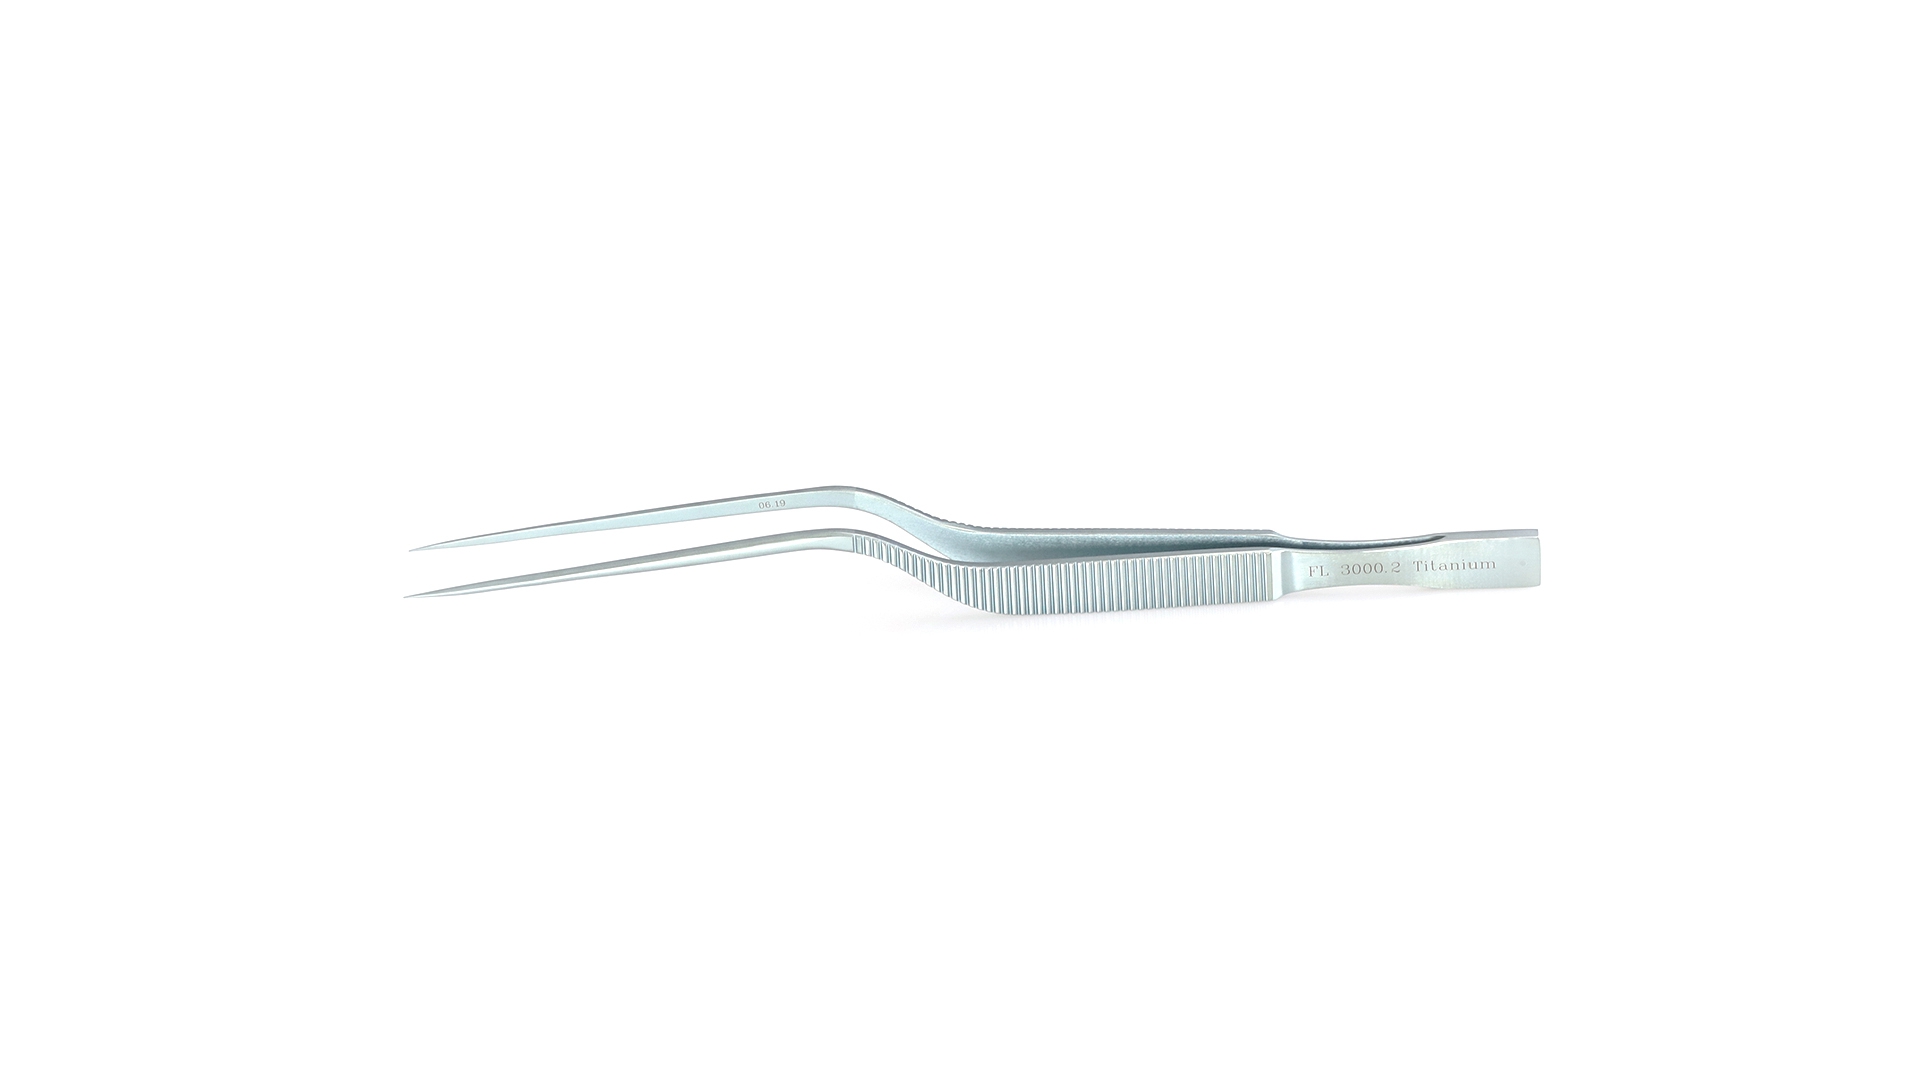 Micro Forceps - Straight 0.25mm Extra fine tips